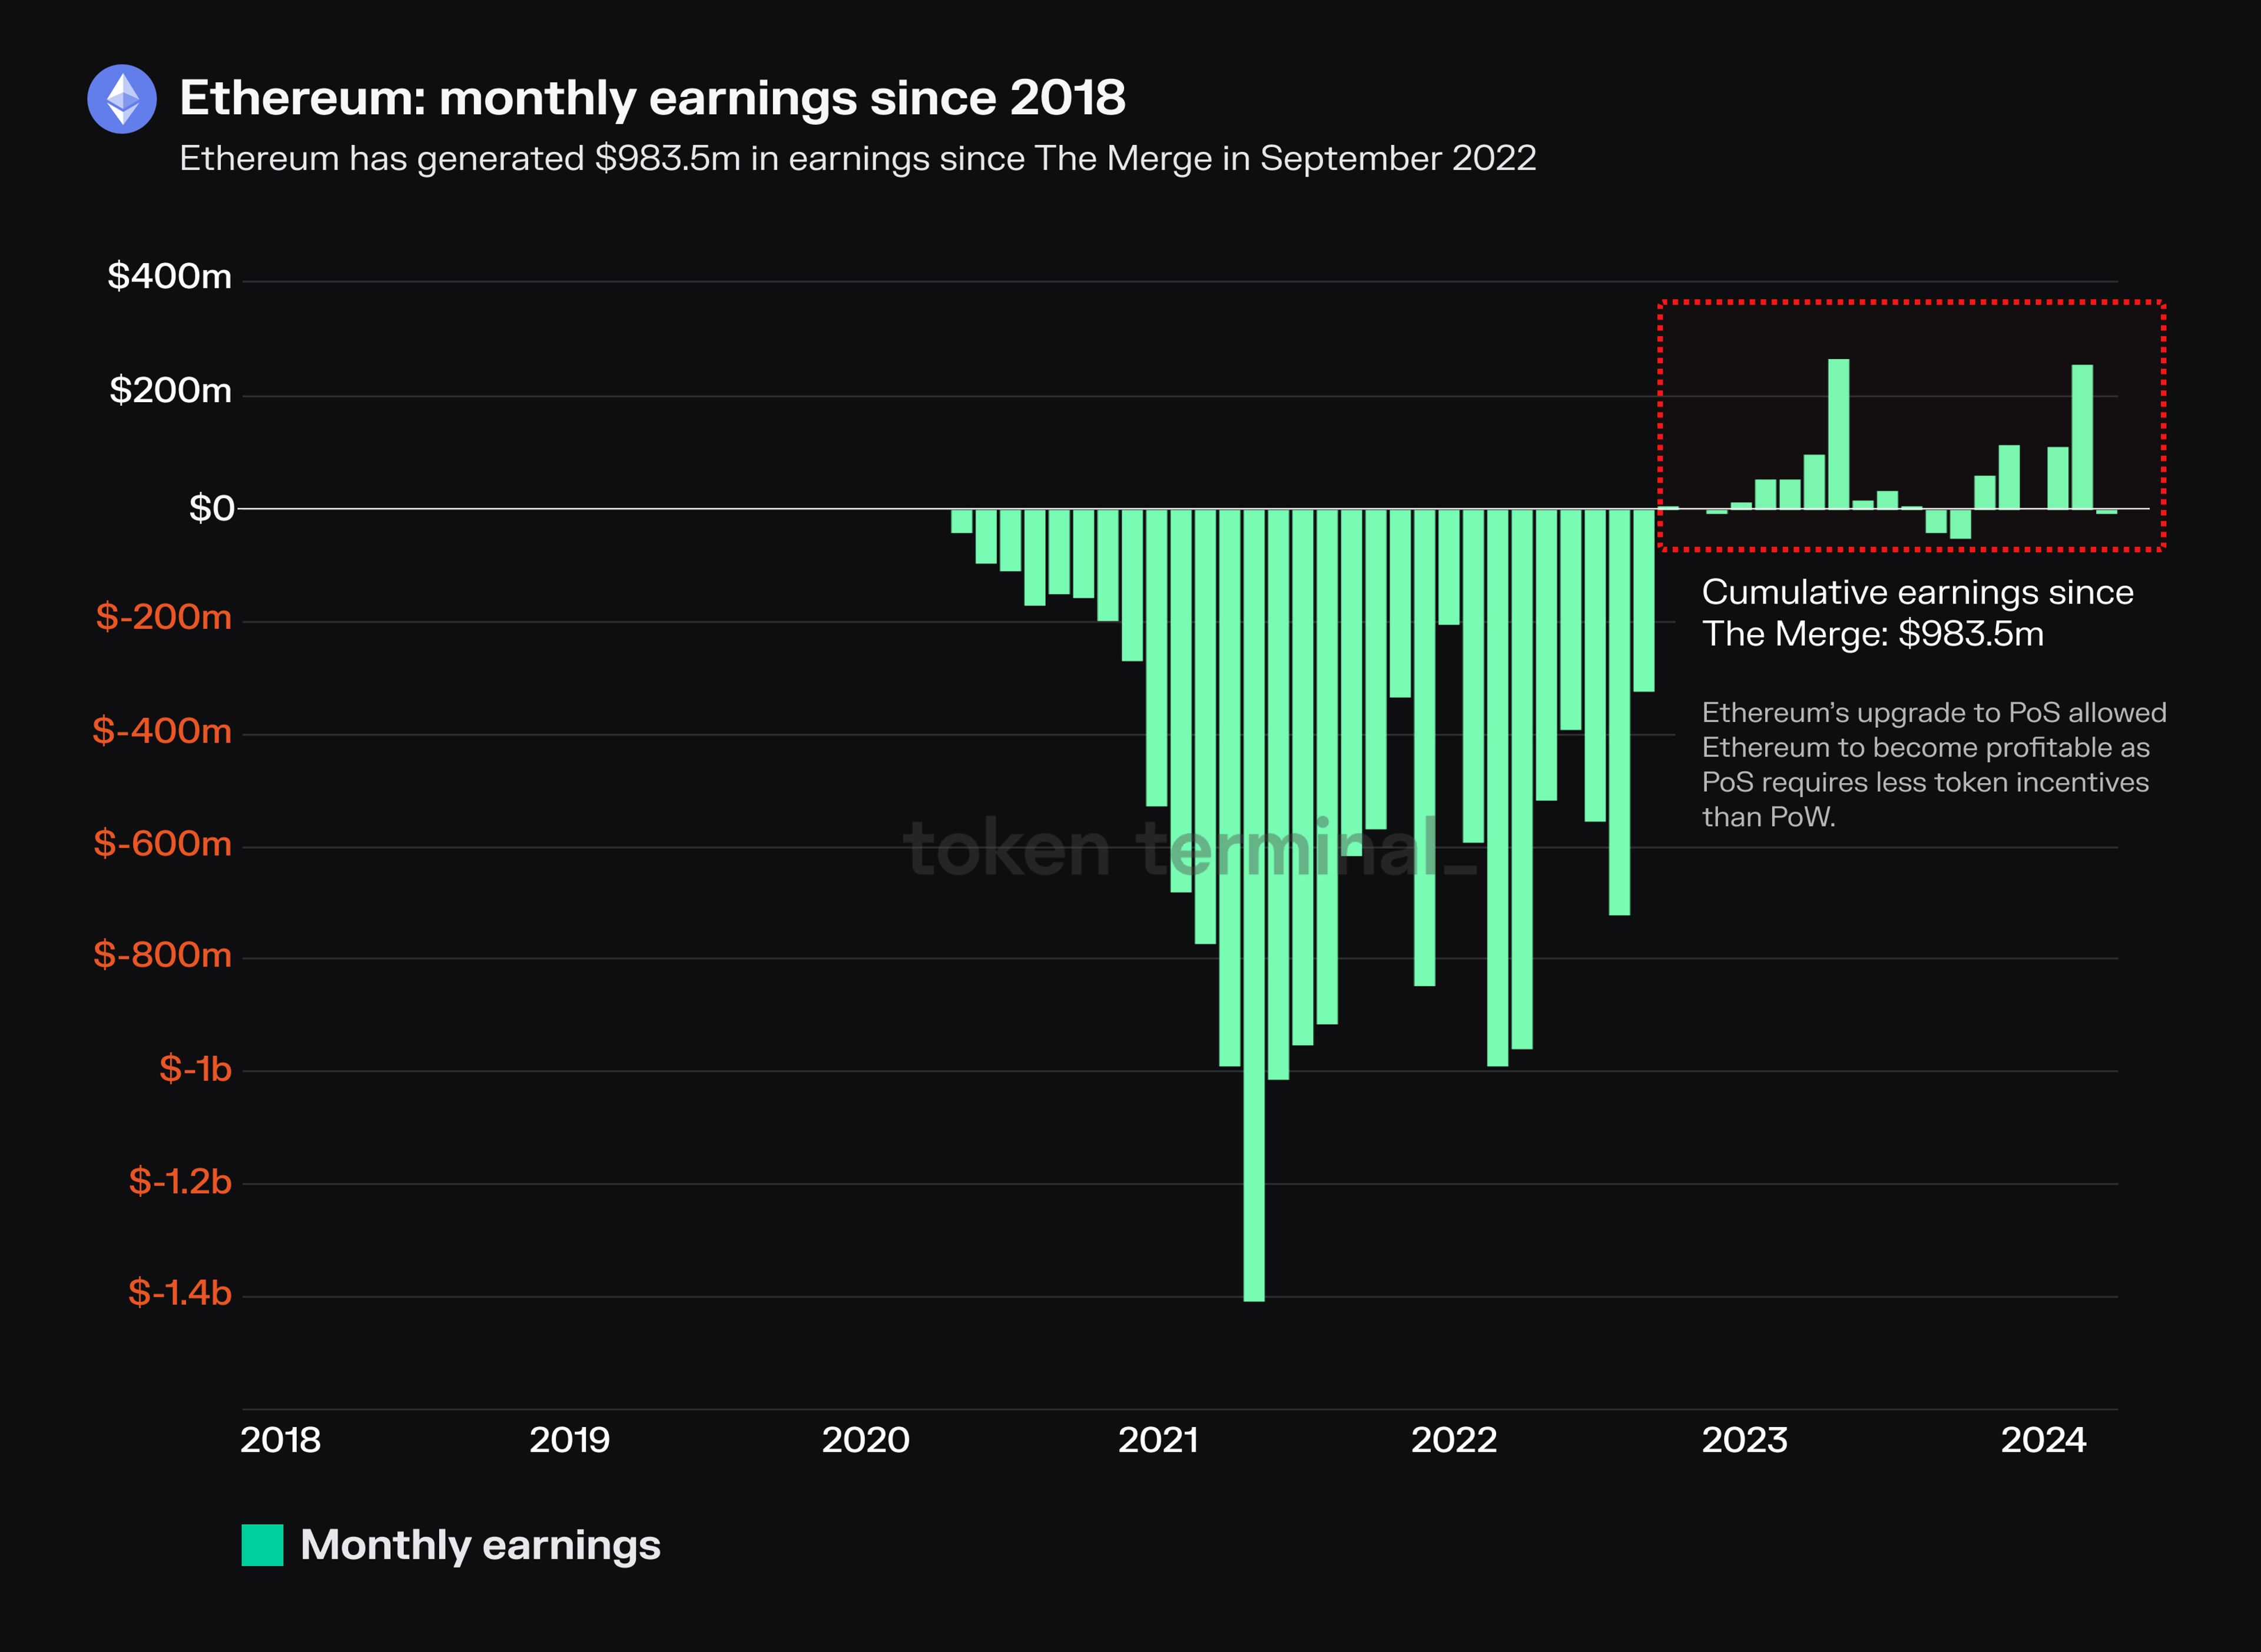 Monthly earnings for Ethereum since 2018.